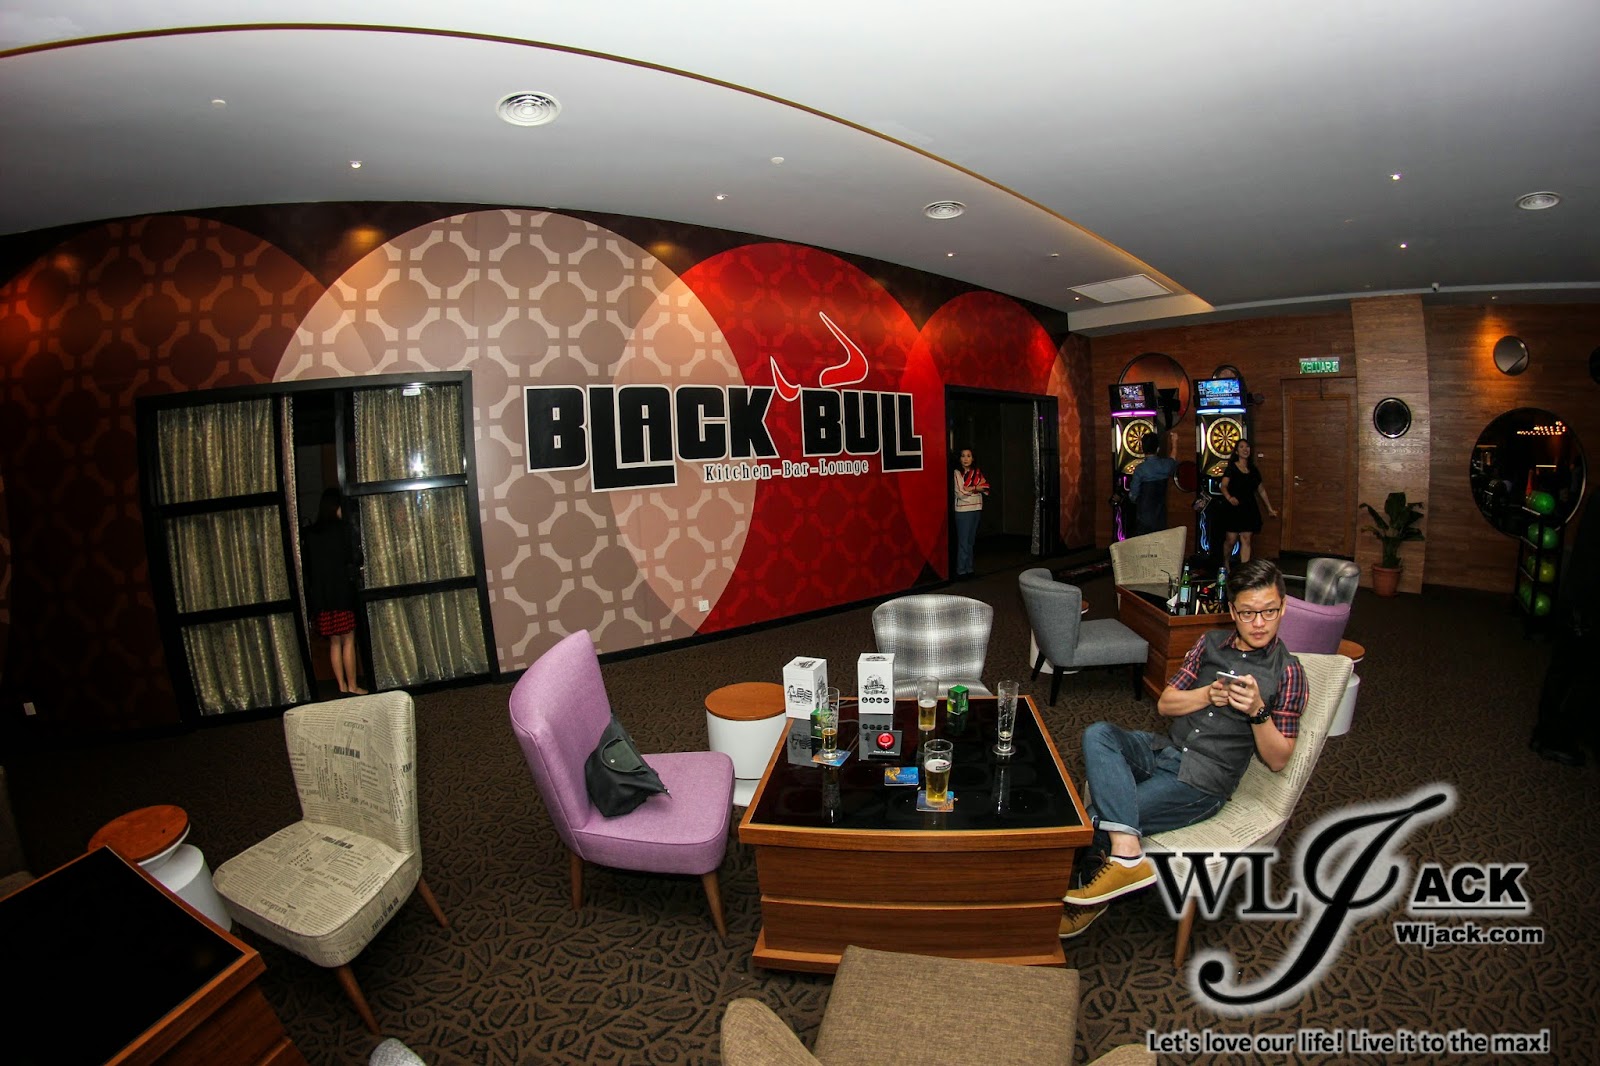 [Launching Event] Black Bull New Outlet Grand Opening @ Mid Valley Megamall